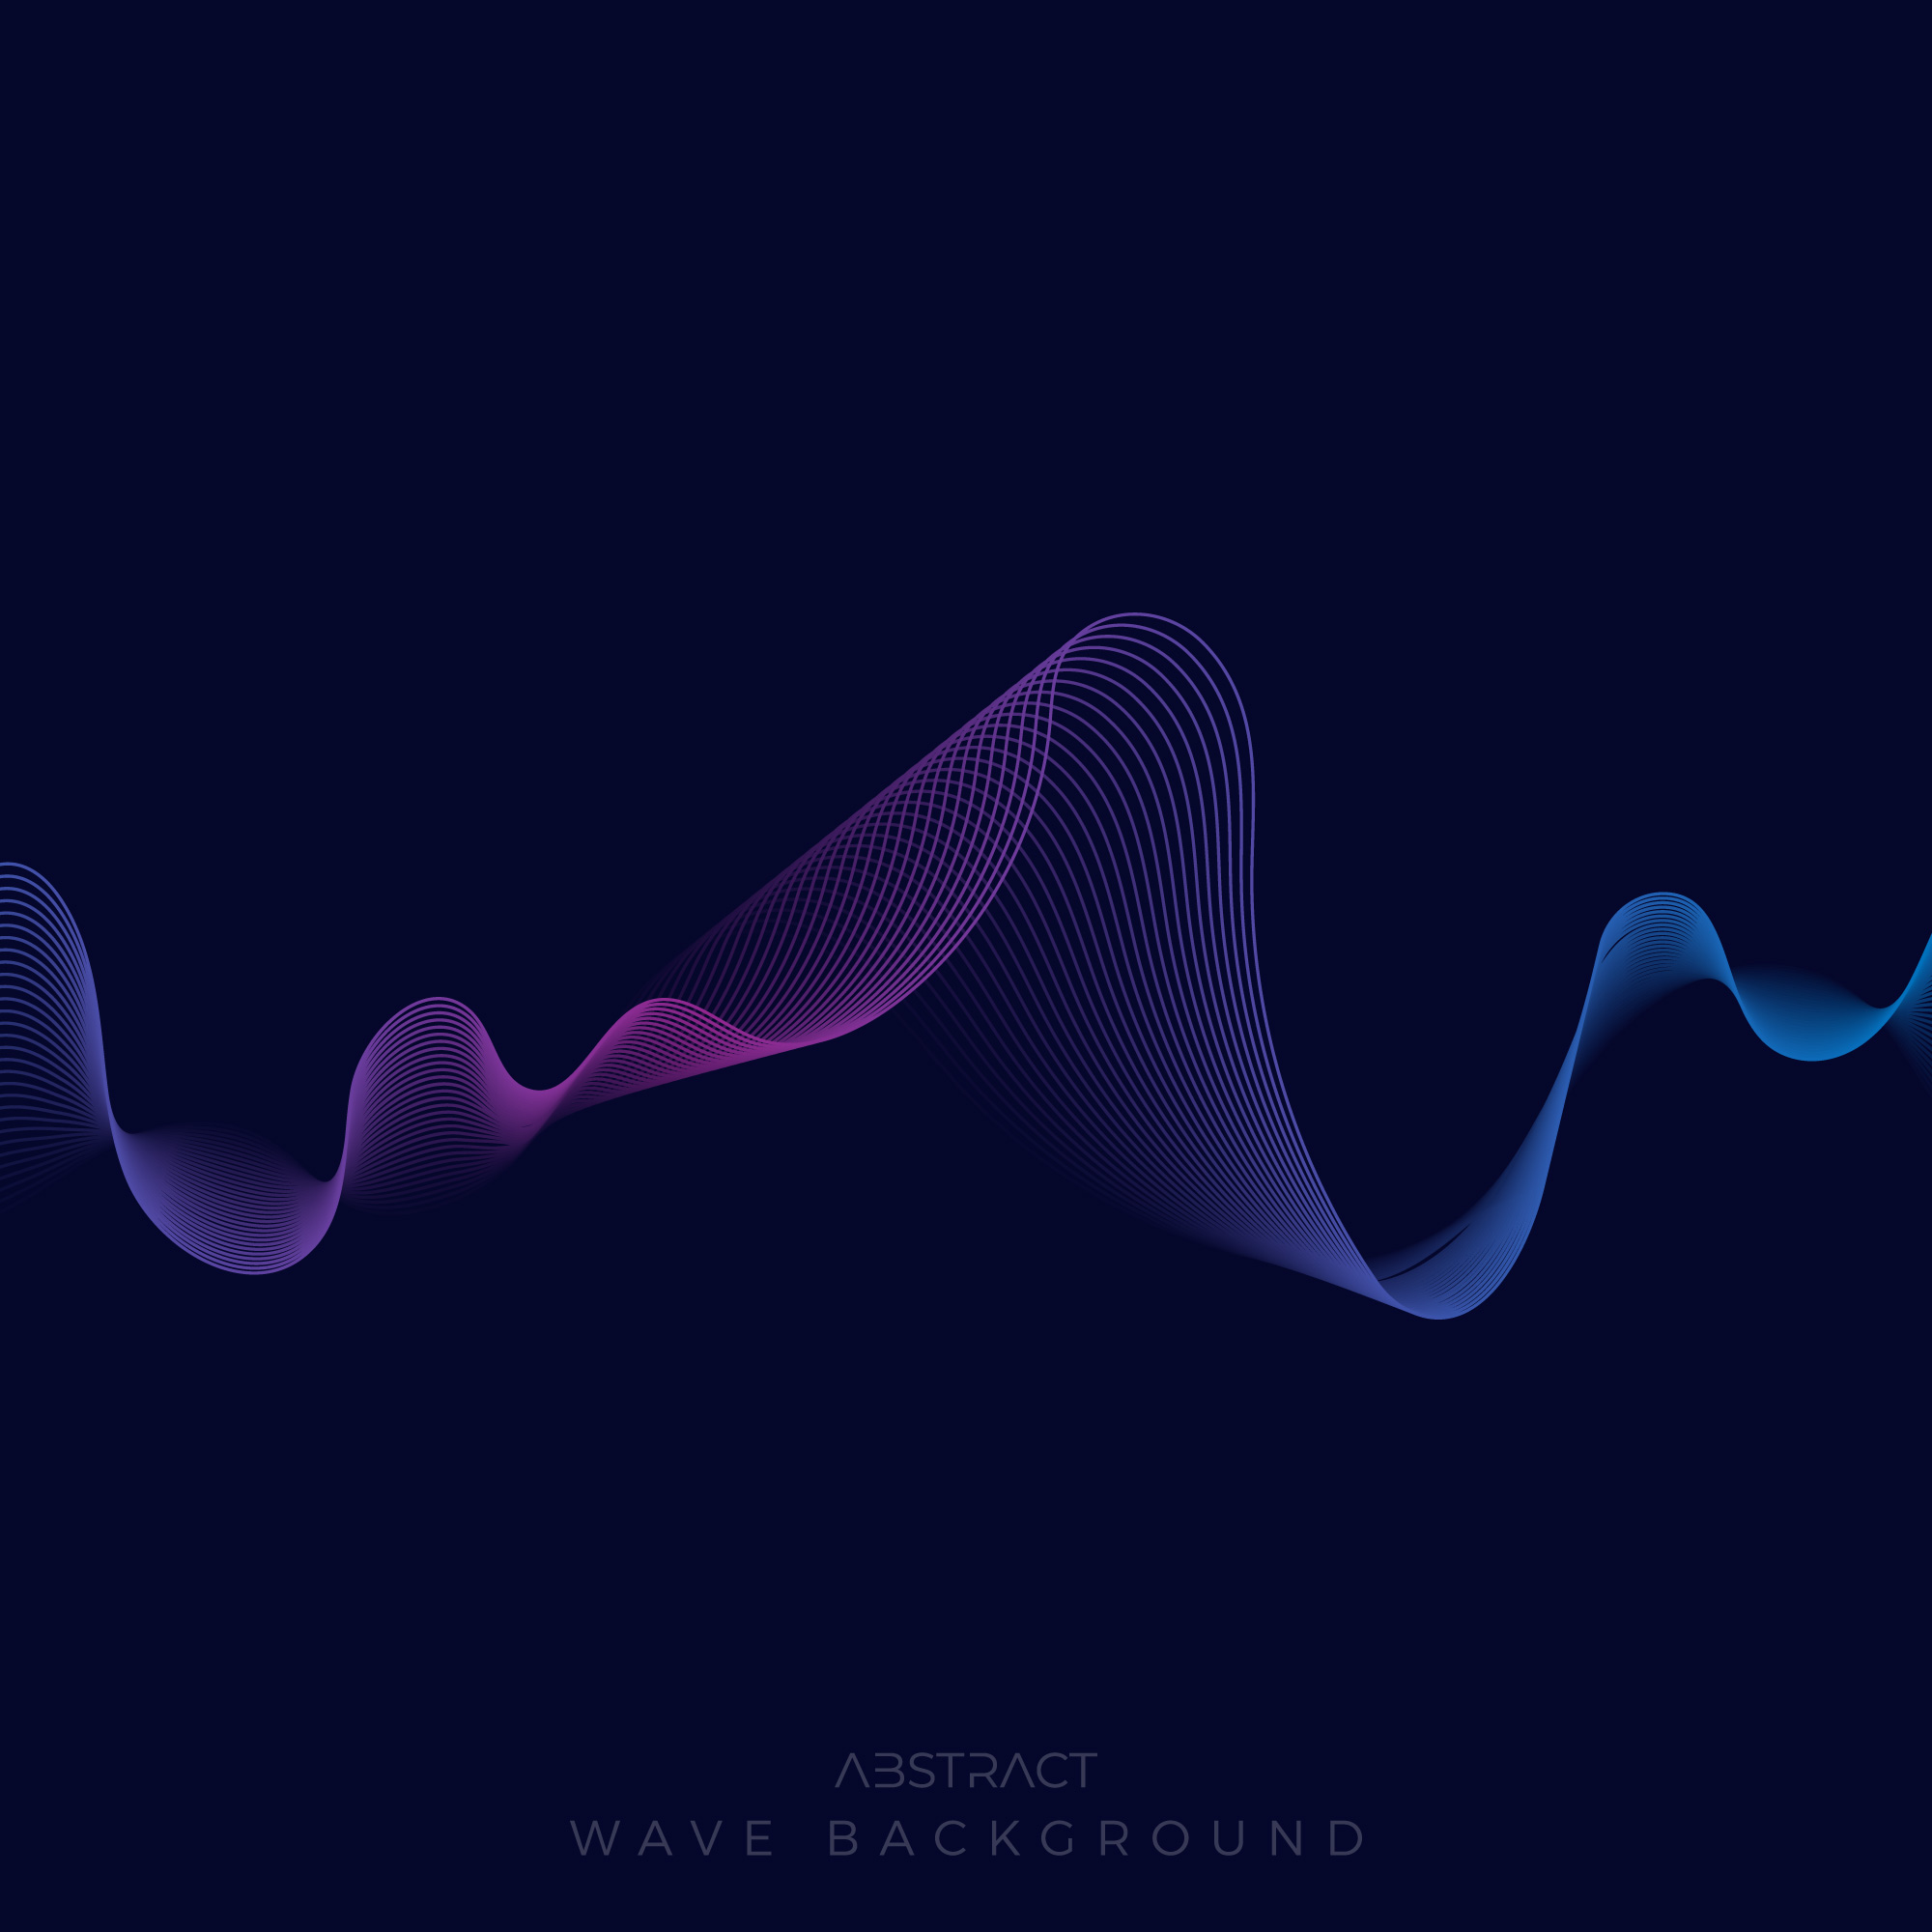 Abstract colorful wave Background cover image.